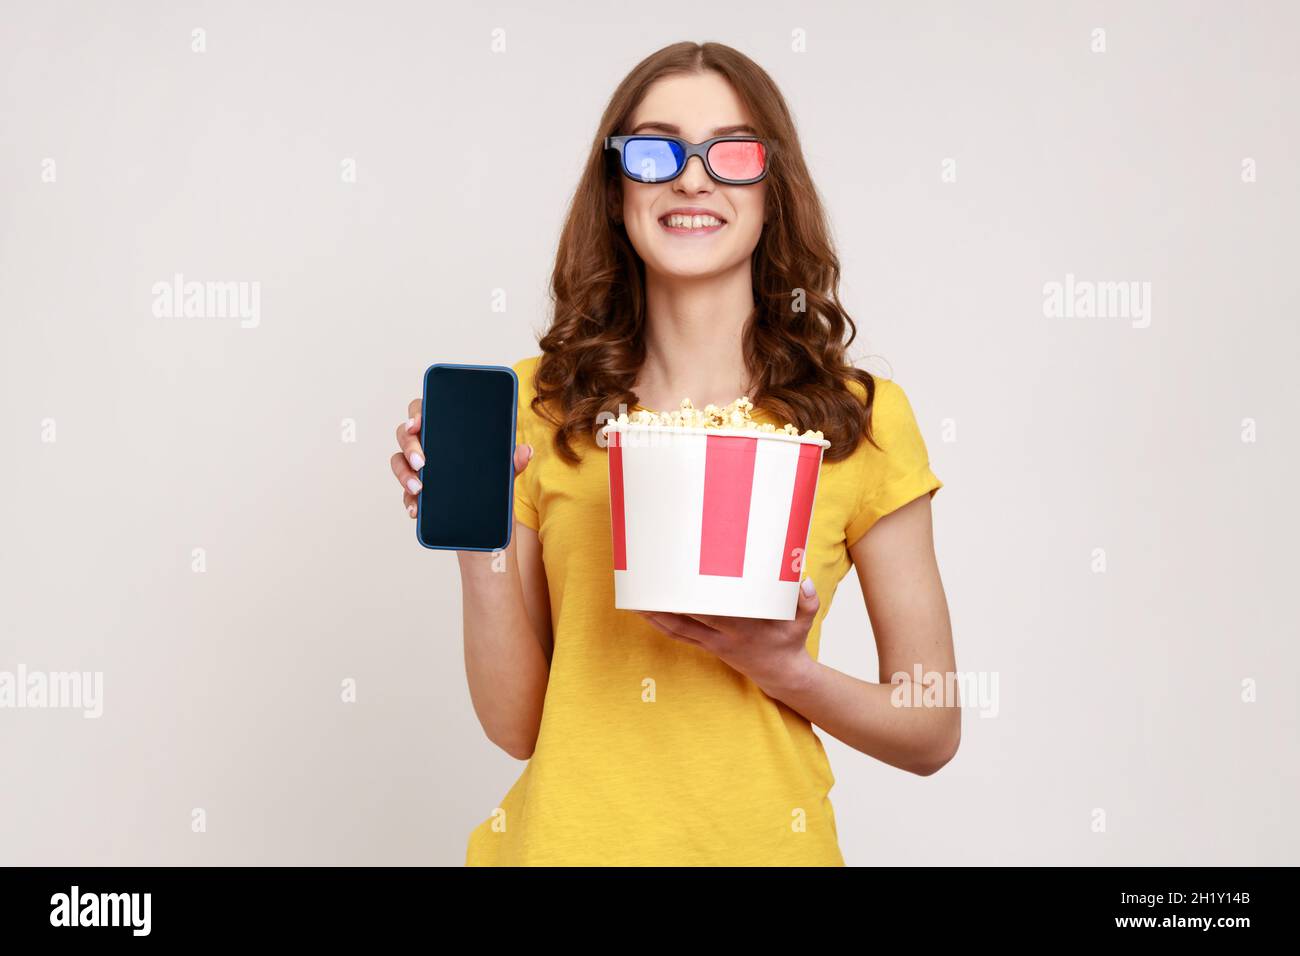 Image of beautiful young woman holding popcorn in bucket, showing smartphone with blank empty screen, smiling to camera, wears yellow T-shirt. Indoor studio shot isolated on gray background. Stock Photo